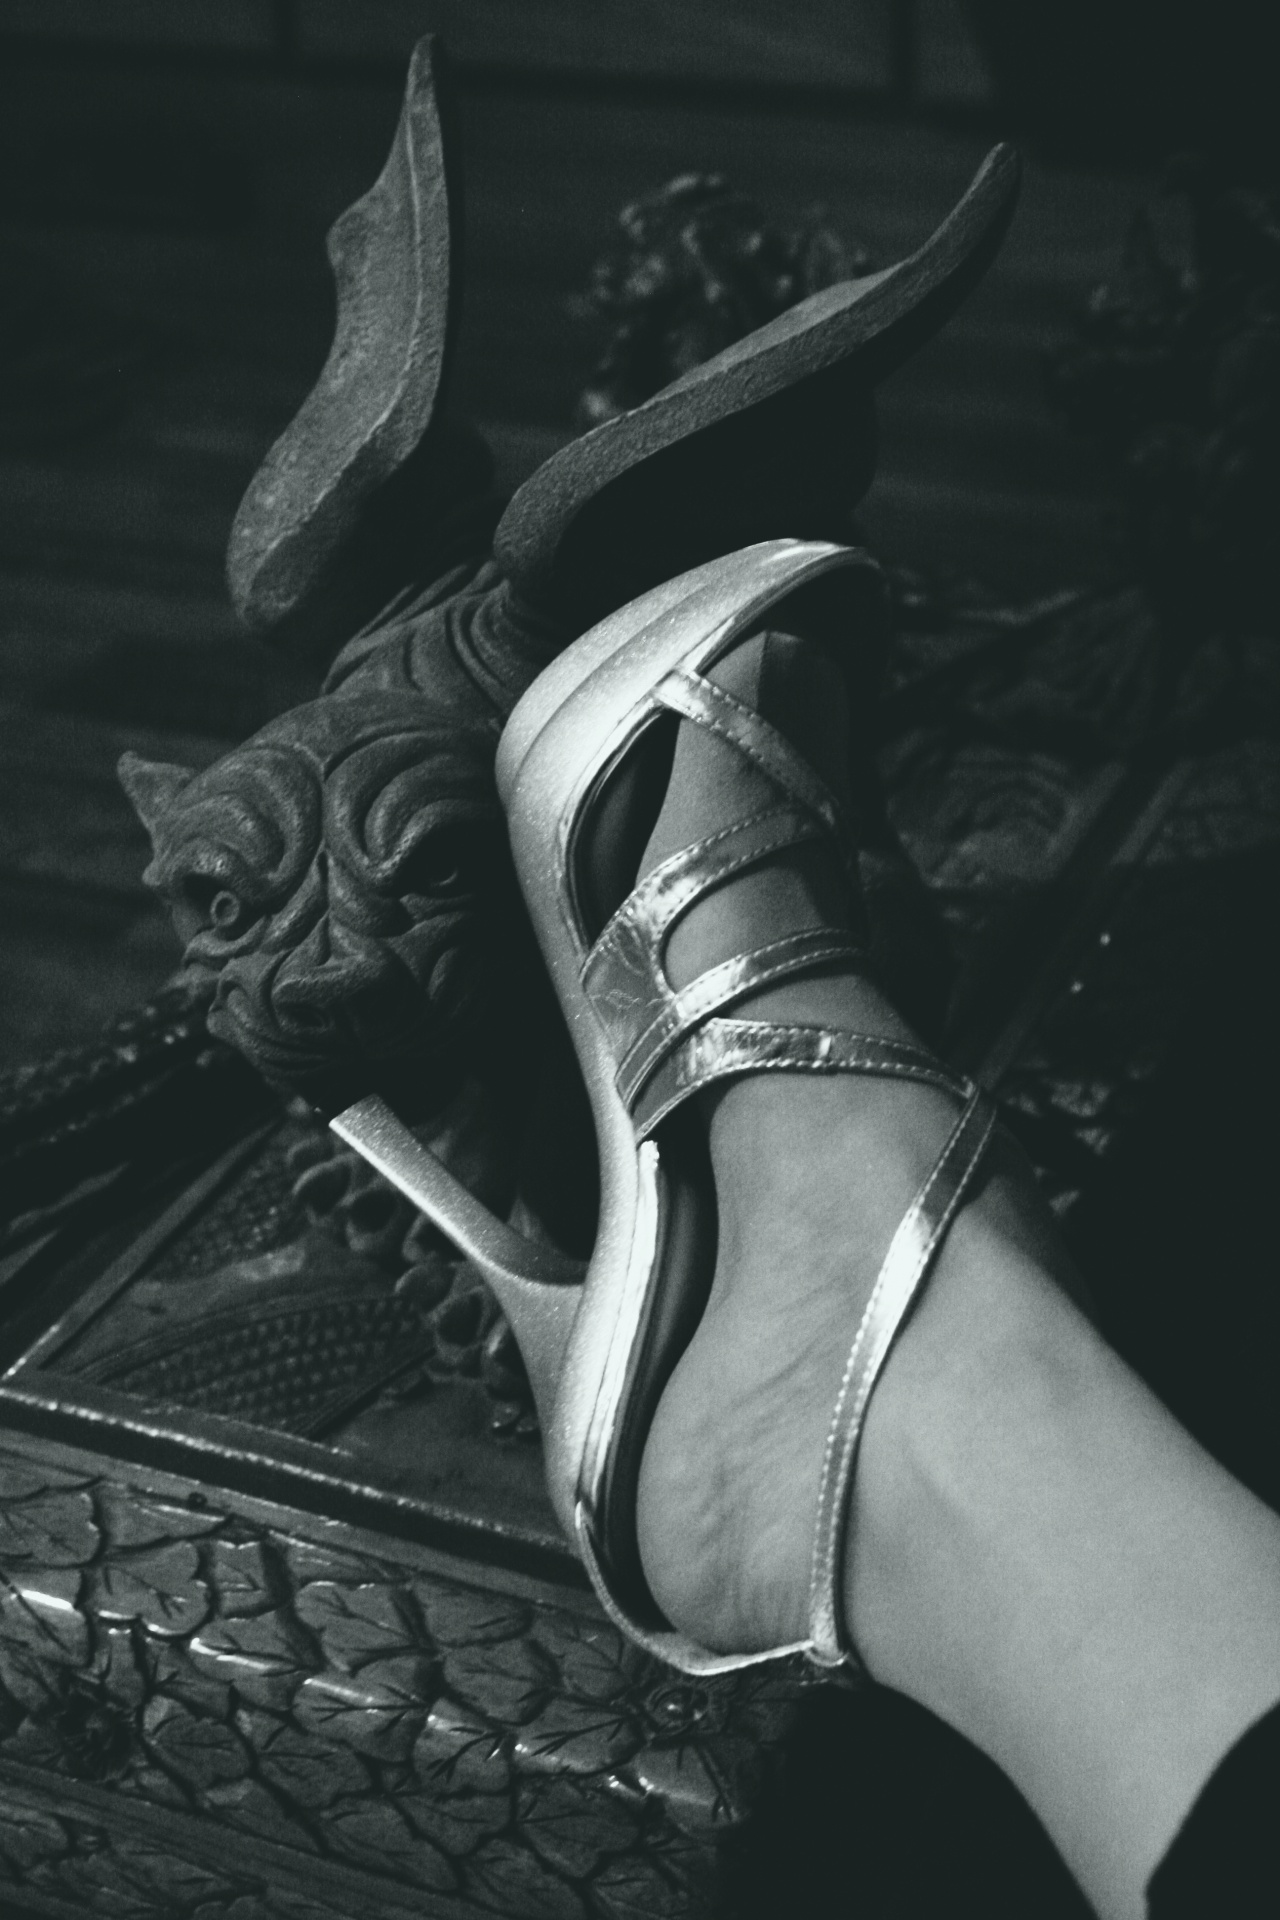 gothic silver shoes free photo